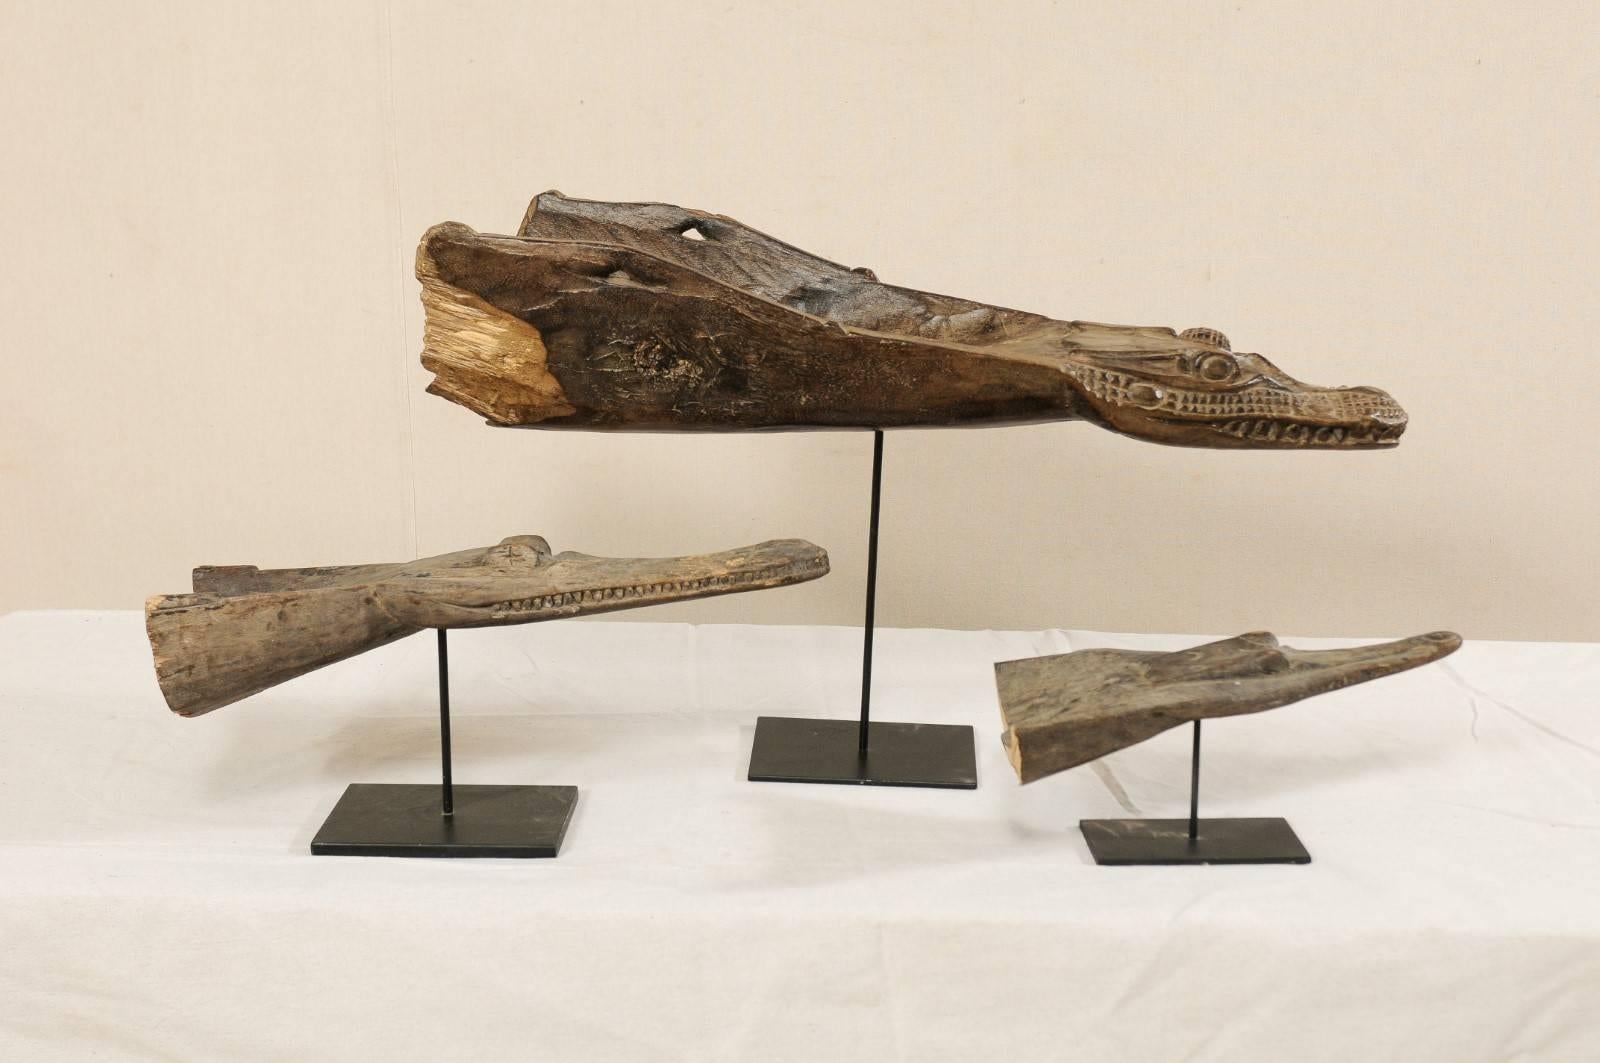 A collection of three carved wood crocodile head boat prows from Papua New Guinea. These mid-20th century Papua New Guinean boat prows have been carved out of wood and each feature the head of a crocodile. Each are varying in size, making a handsome